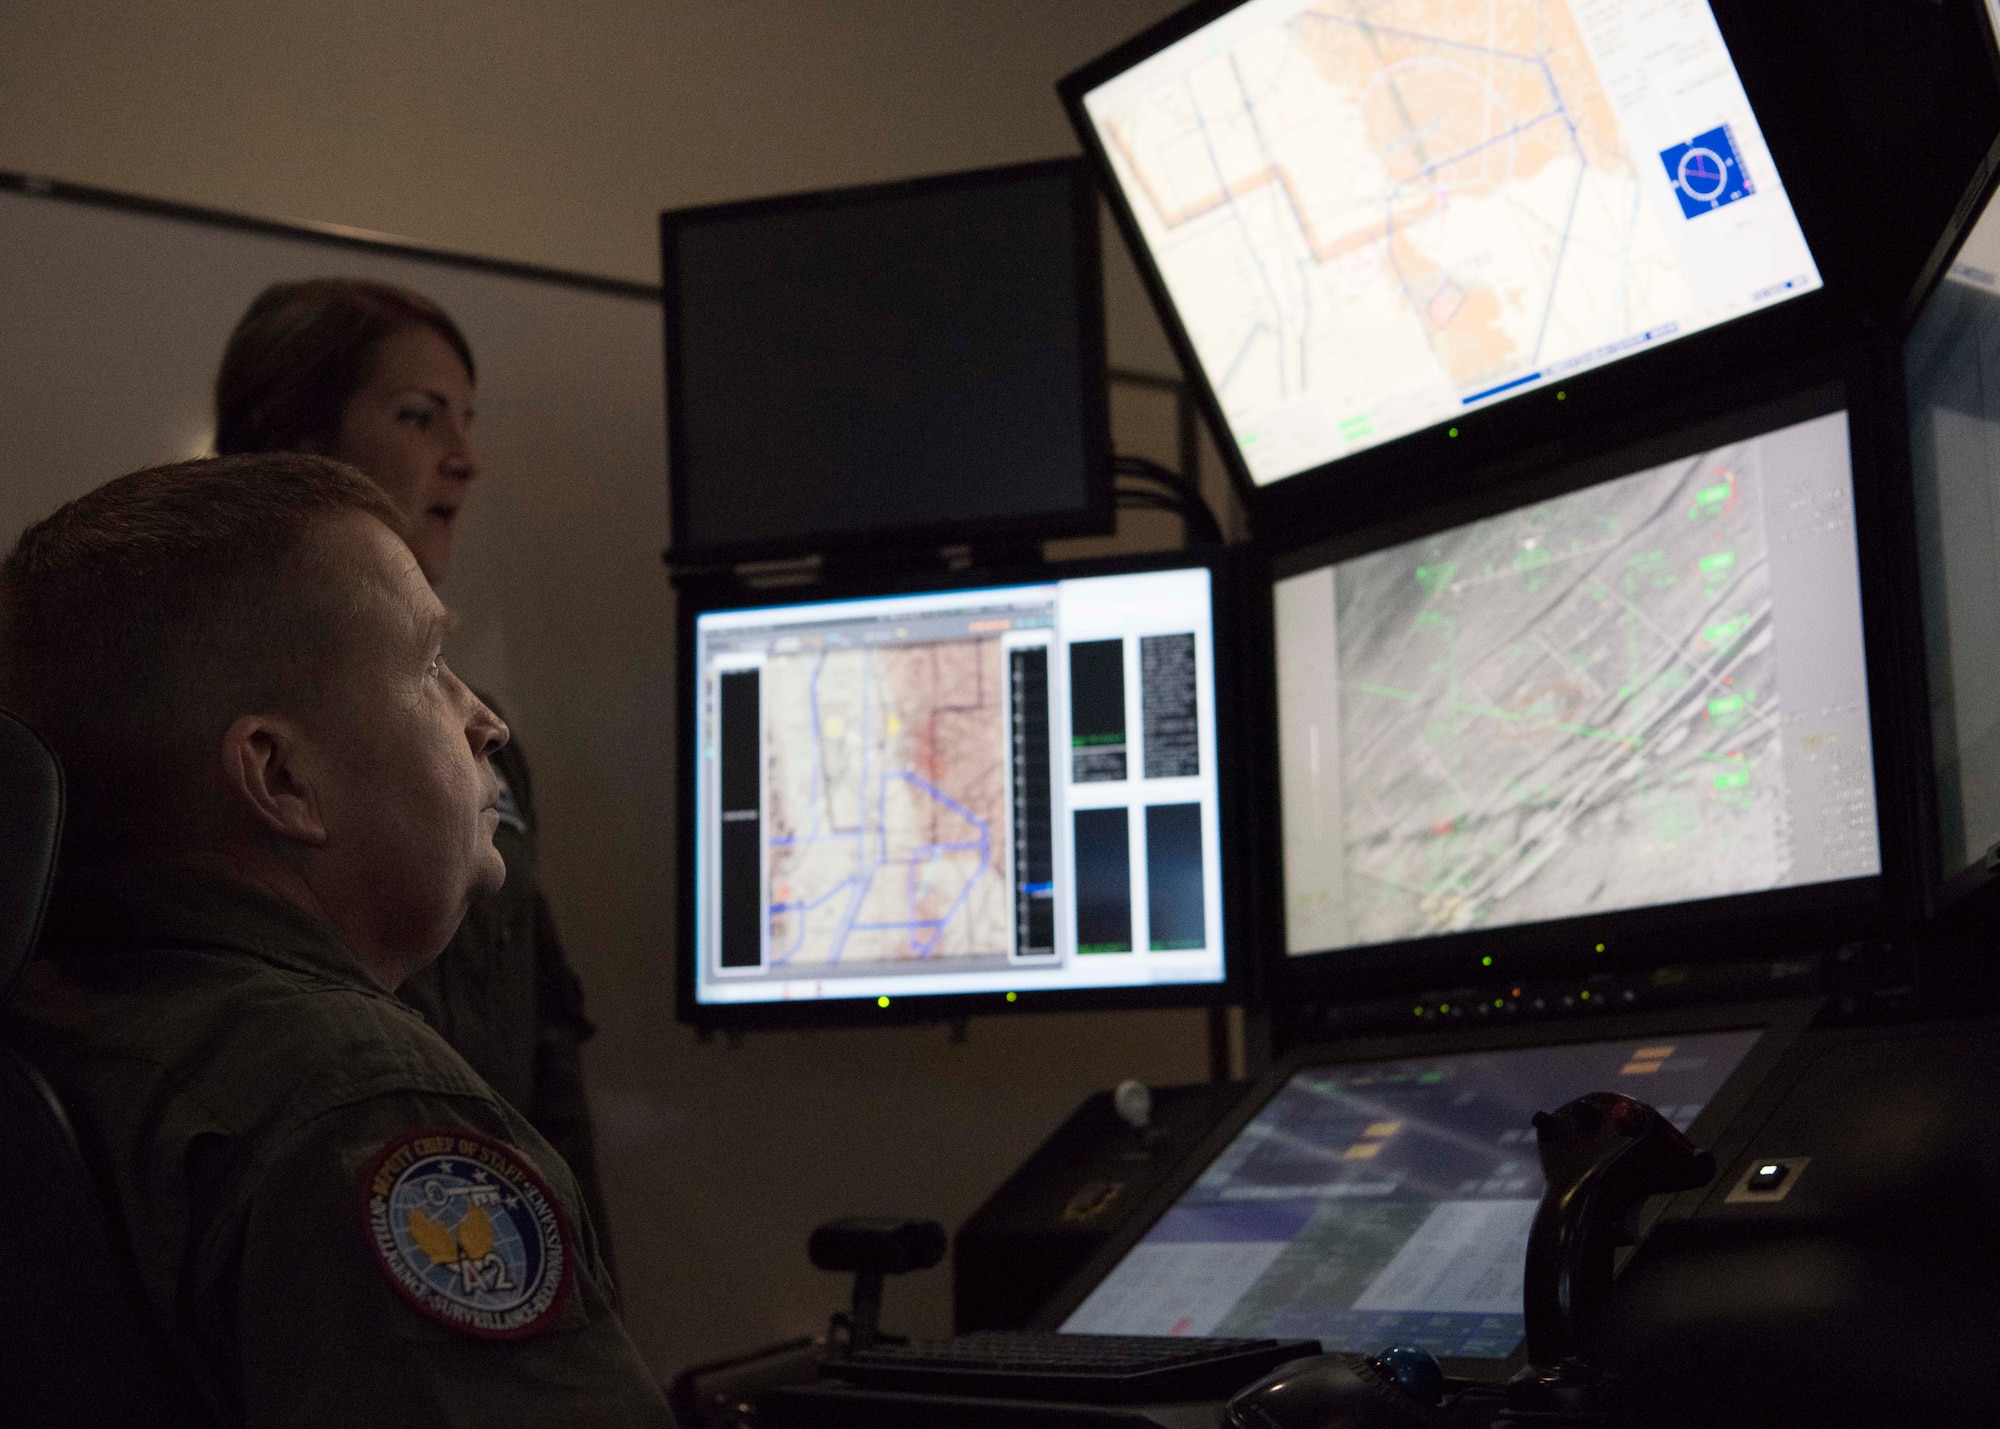 Capt. Amanda Collazzo, 6th Attack Squadron chief of weapons, briefs Brig. Gen. James Cluff, Remotely Piloted Aircraft, Big Wing Intelligence, Surveillance and Reconnaissance director, while he operates a Block 50 MQ-9 Reaper cockpit simulator. The 16th Training Squadron recently upgraded their simulators from the Block 30 model to the Block 50, to keep their training platforms up to date. (U.S. Air Force photo by Staff Sgt. BreeAnn Sachs)